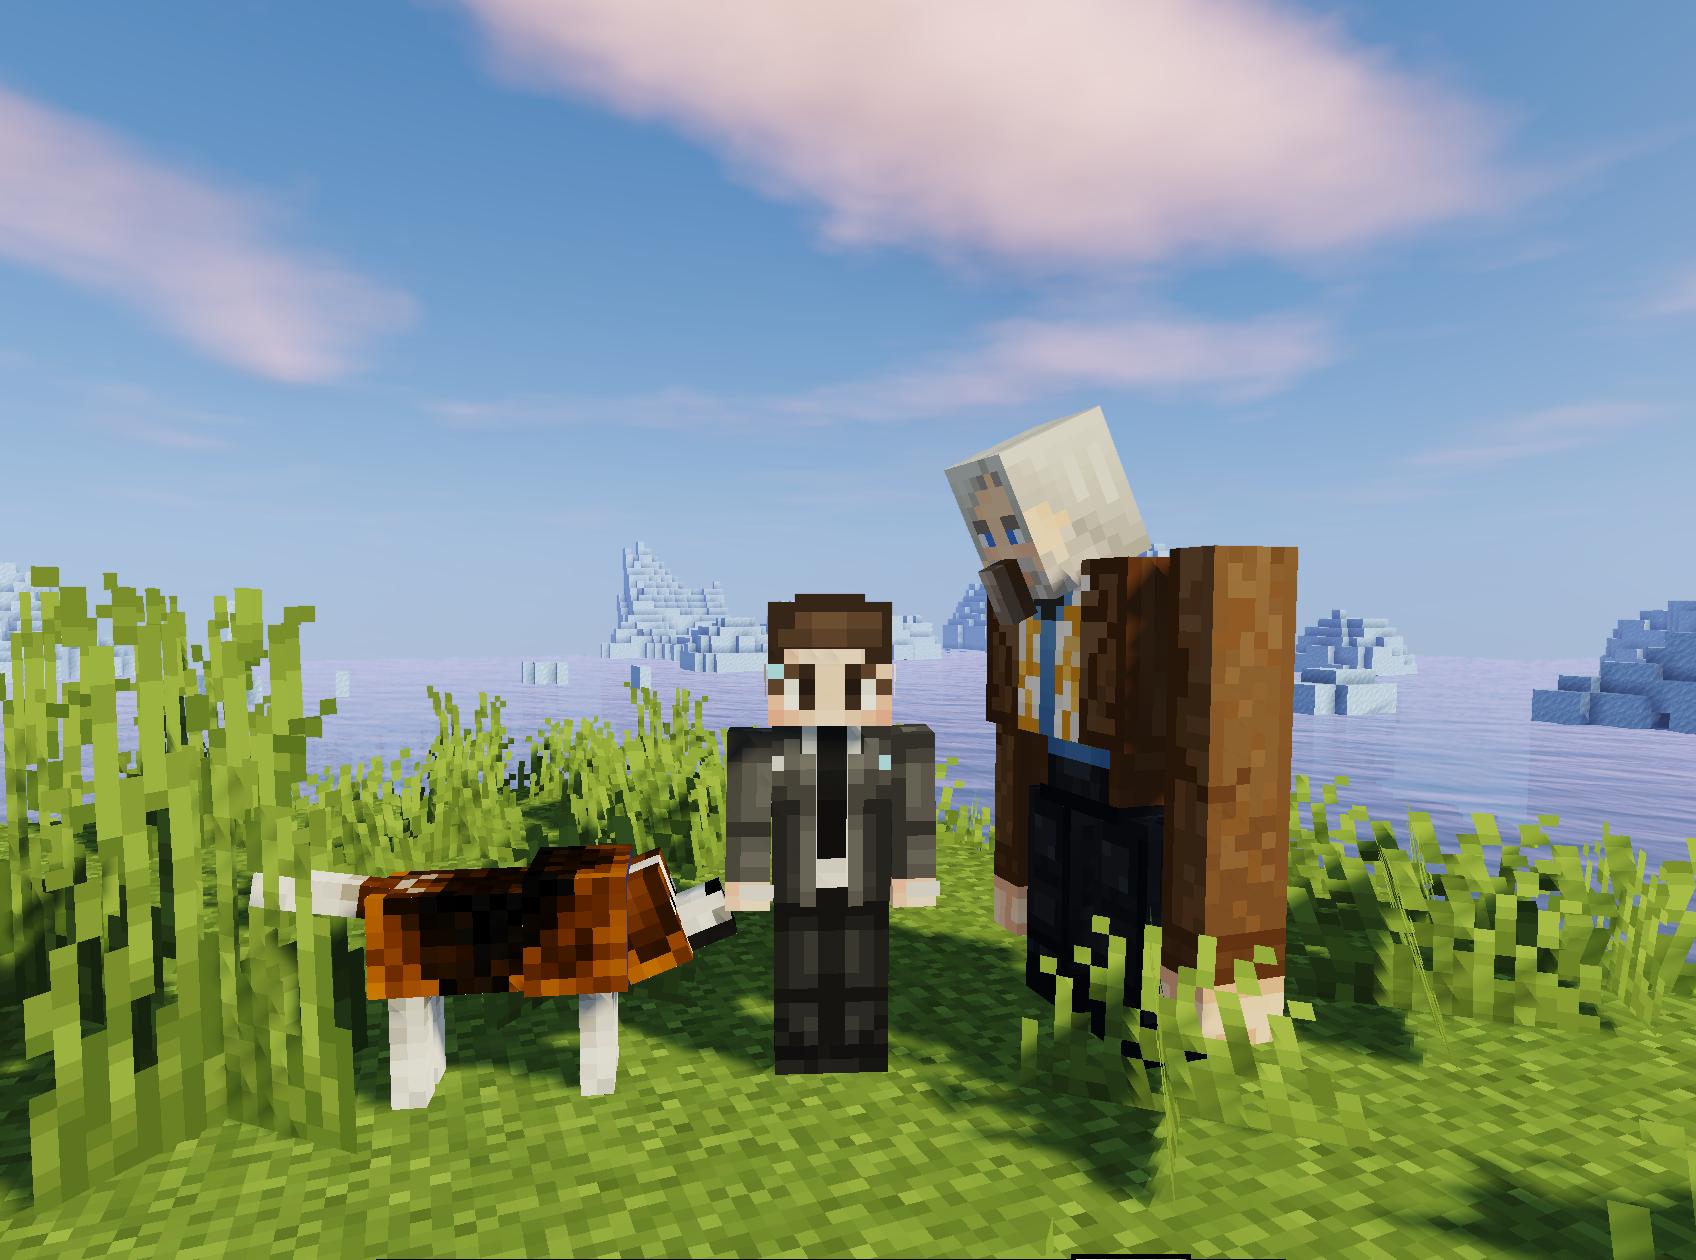 Dr Heating M Wave Minecraft Shenanigans Thread I Went Down The Modding Rabbit Hole So Here Are The Mob Skins I Ve Made So Far Lol Plus My Current Skin